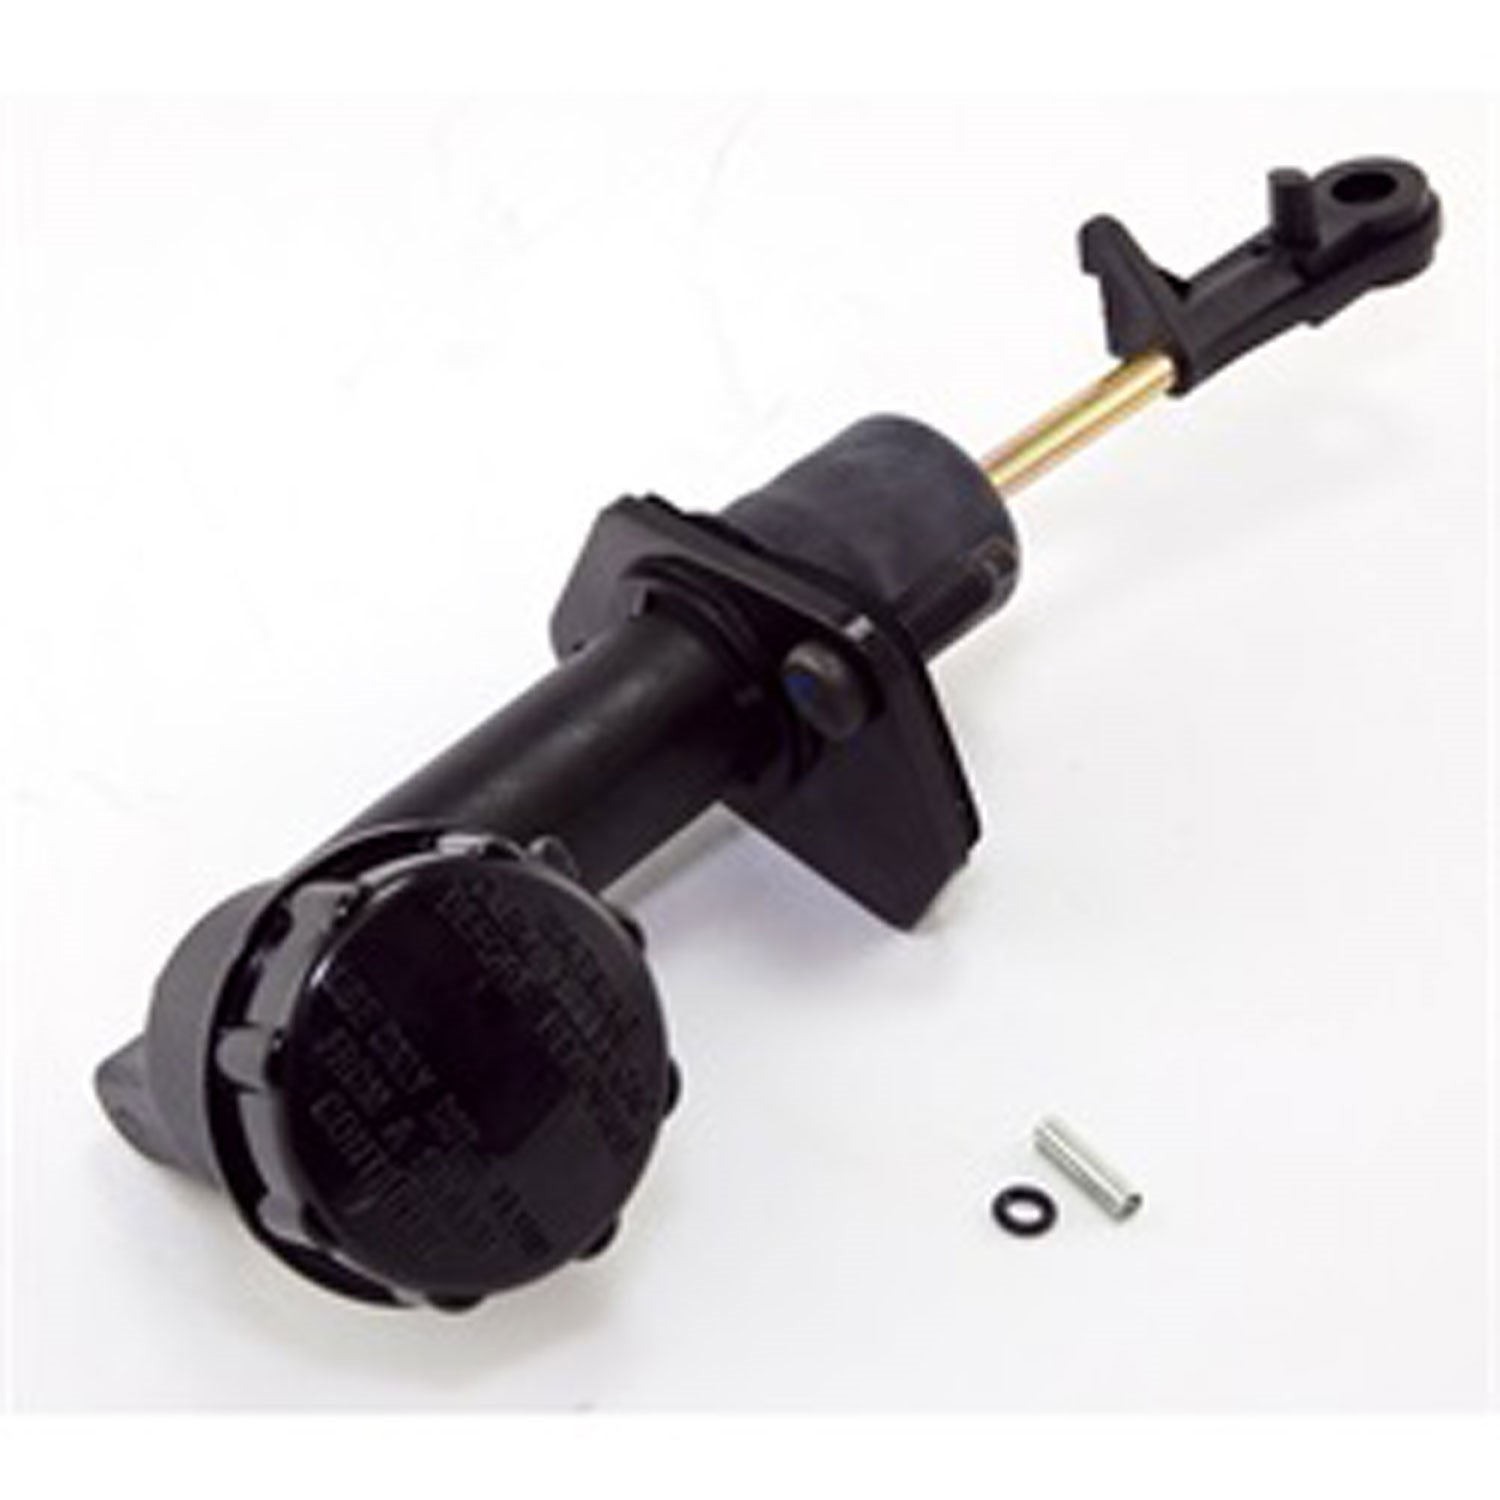 Replacement clutch master cylinder from Omix-ADA, Fits 94-95 Jeep Wrangler YJ with 4 or 6 cylinder engines.